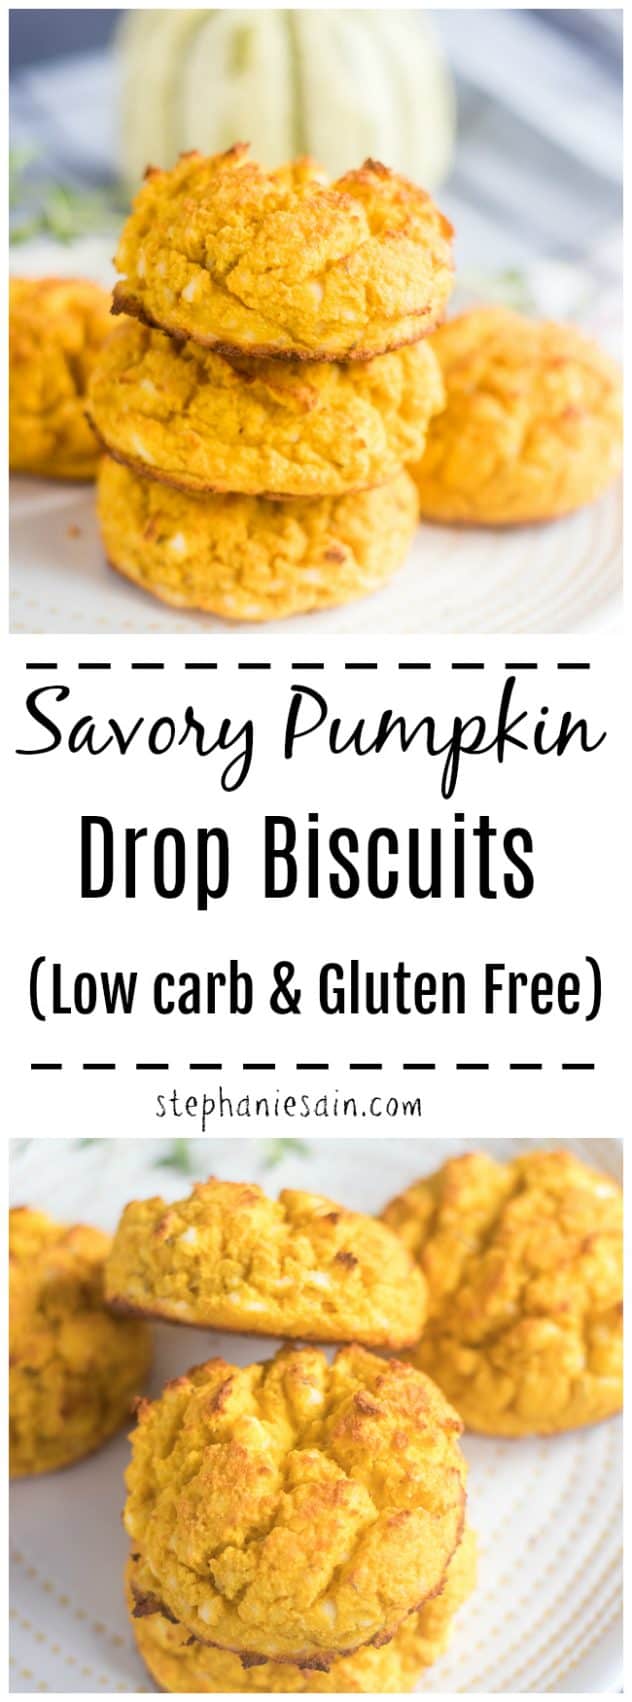 These Pumpkin Biscuits are super easy to make, savory and perfect for snacks or with meals. Made with coconut flour & fragrant thyme. Gluten Free & Low Carb.